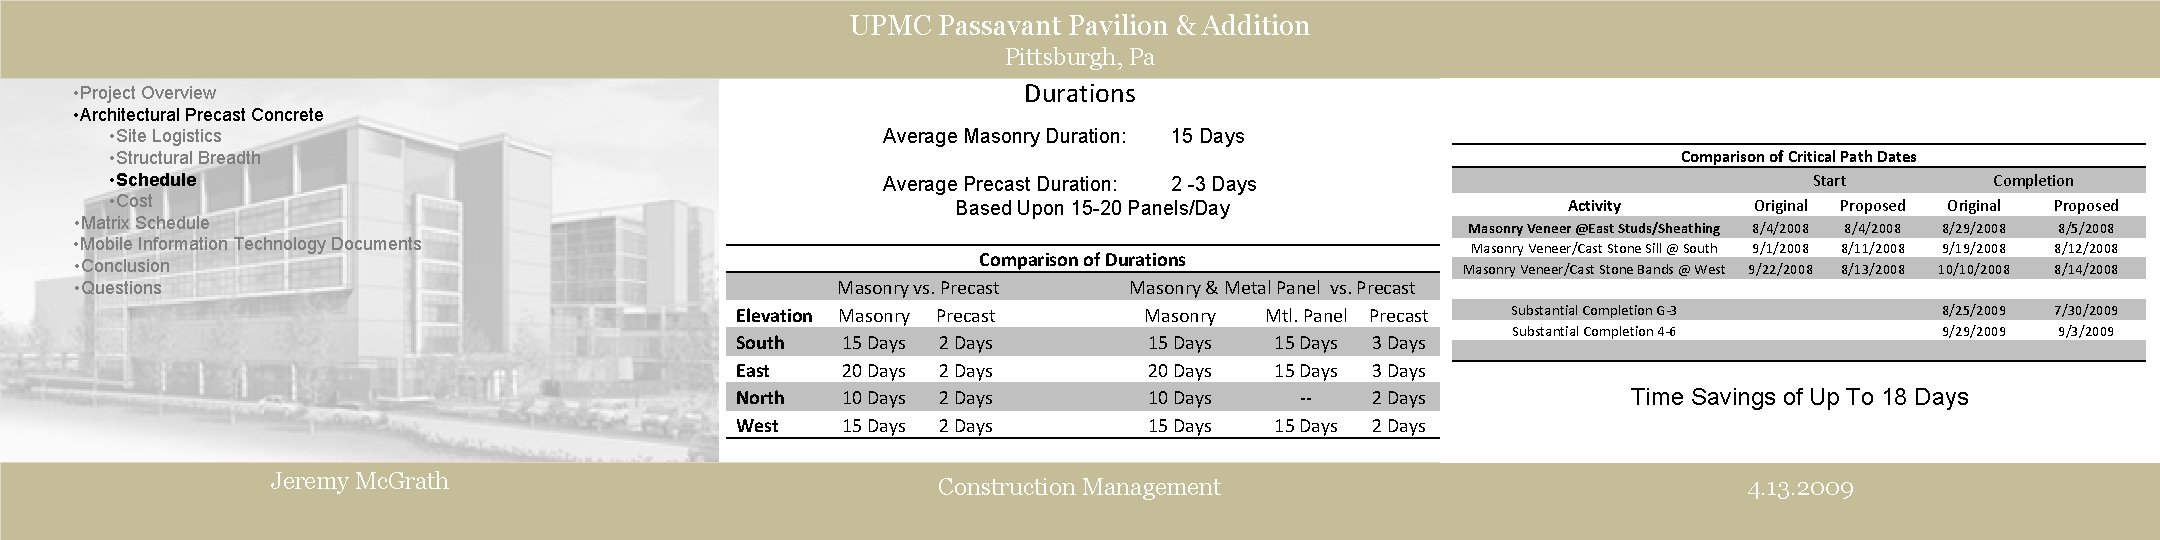 UPMC Passavant Pavilion & Addition Pittsburgh, Pa Durations • Project Overview • Architectural Precast